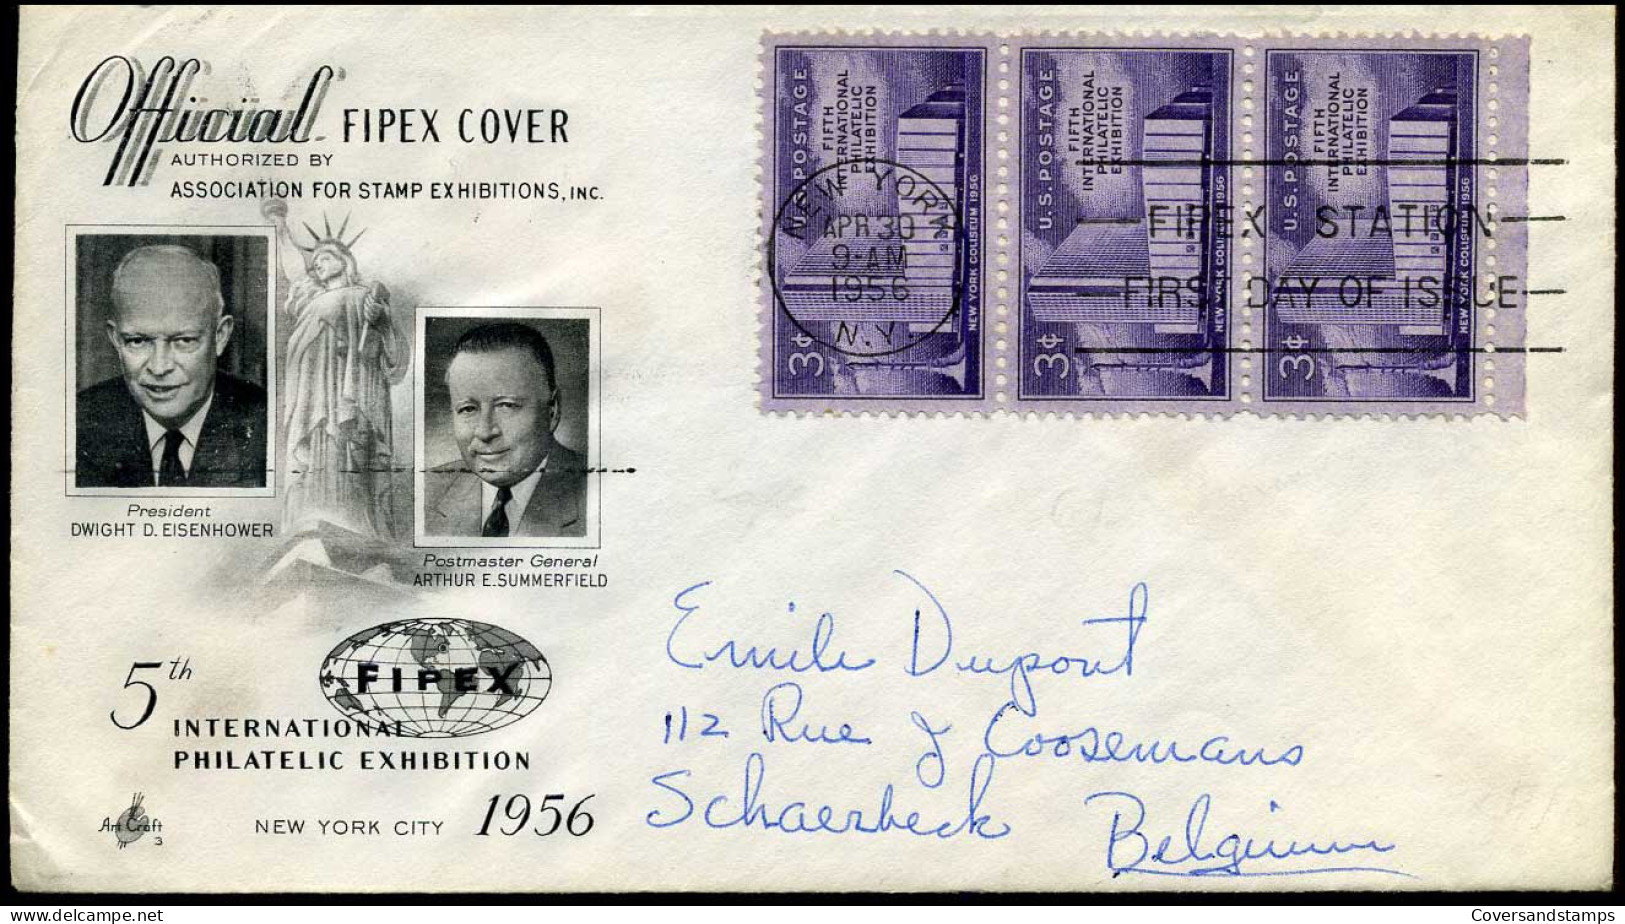 FDC - Official Fipex Cover - 5th International Philatelic Exhibition - 1951-1960